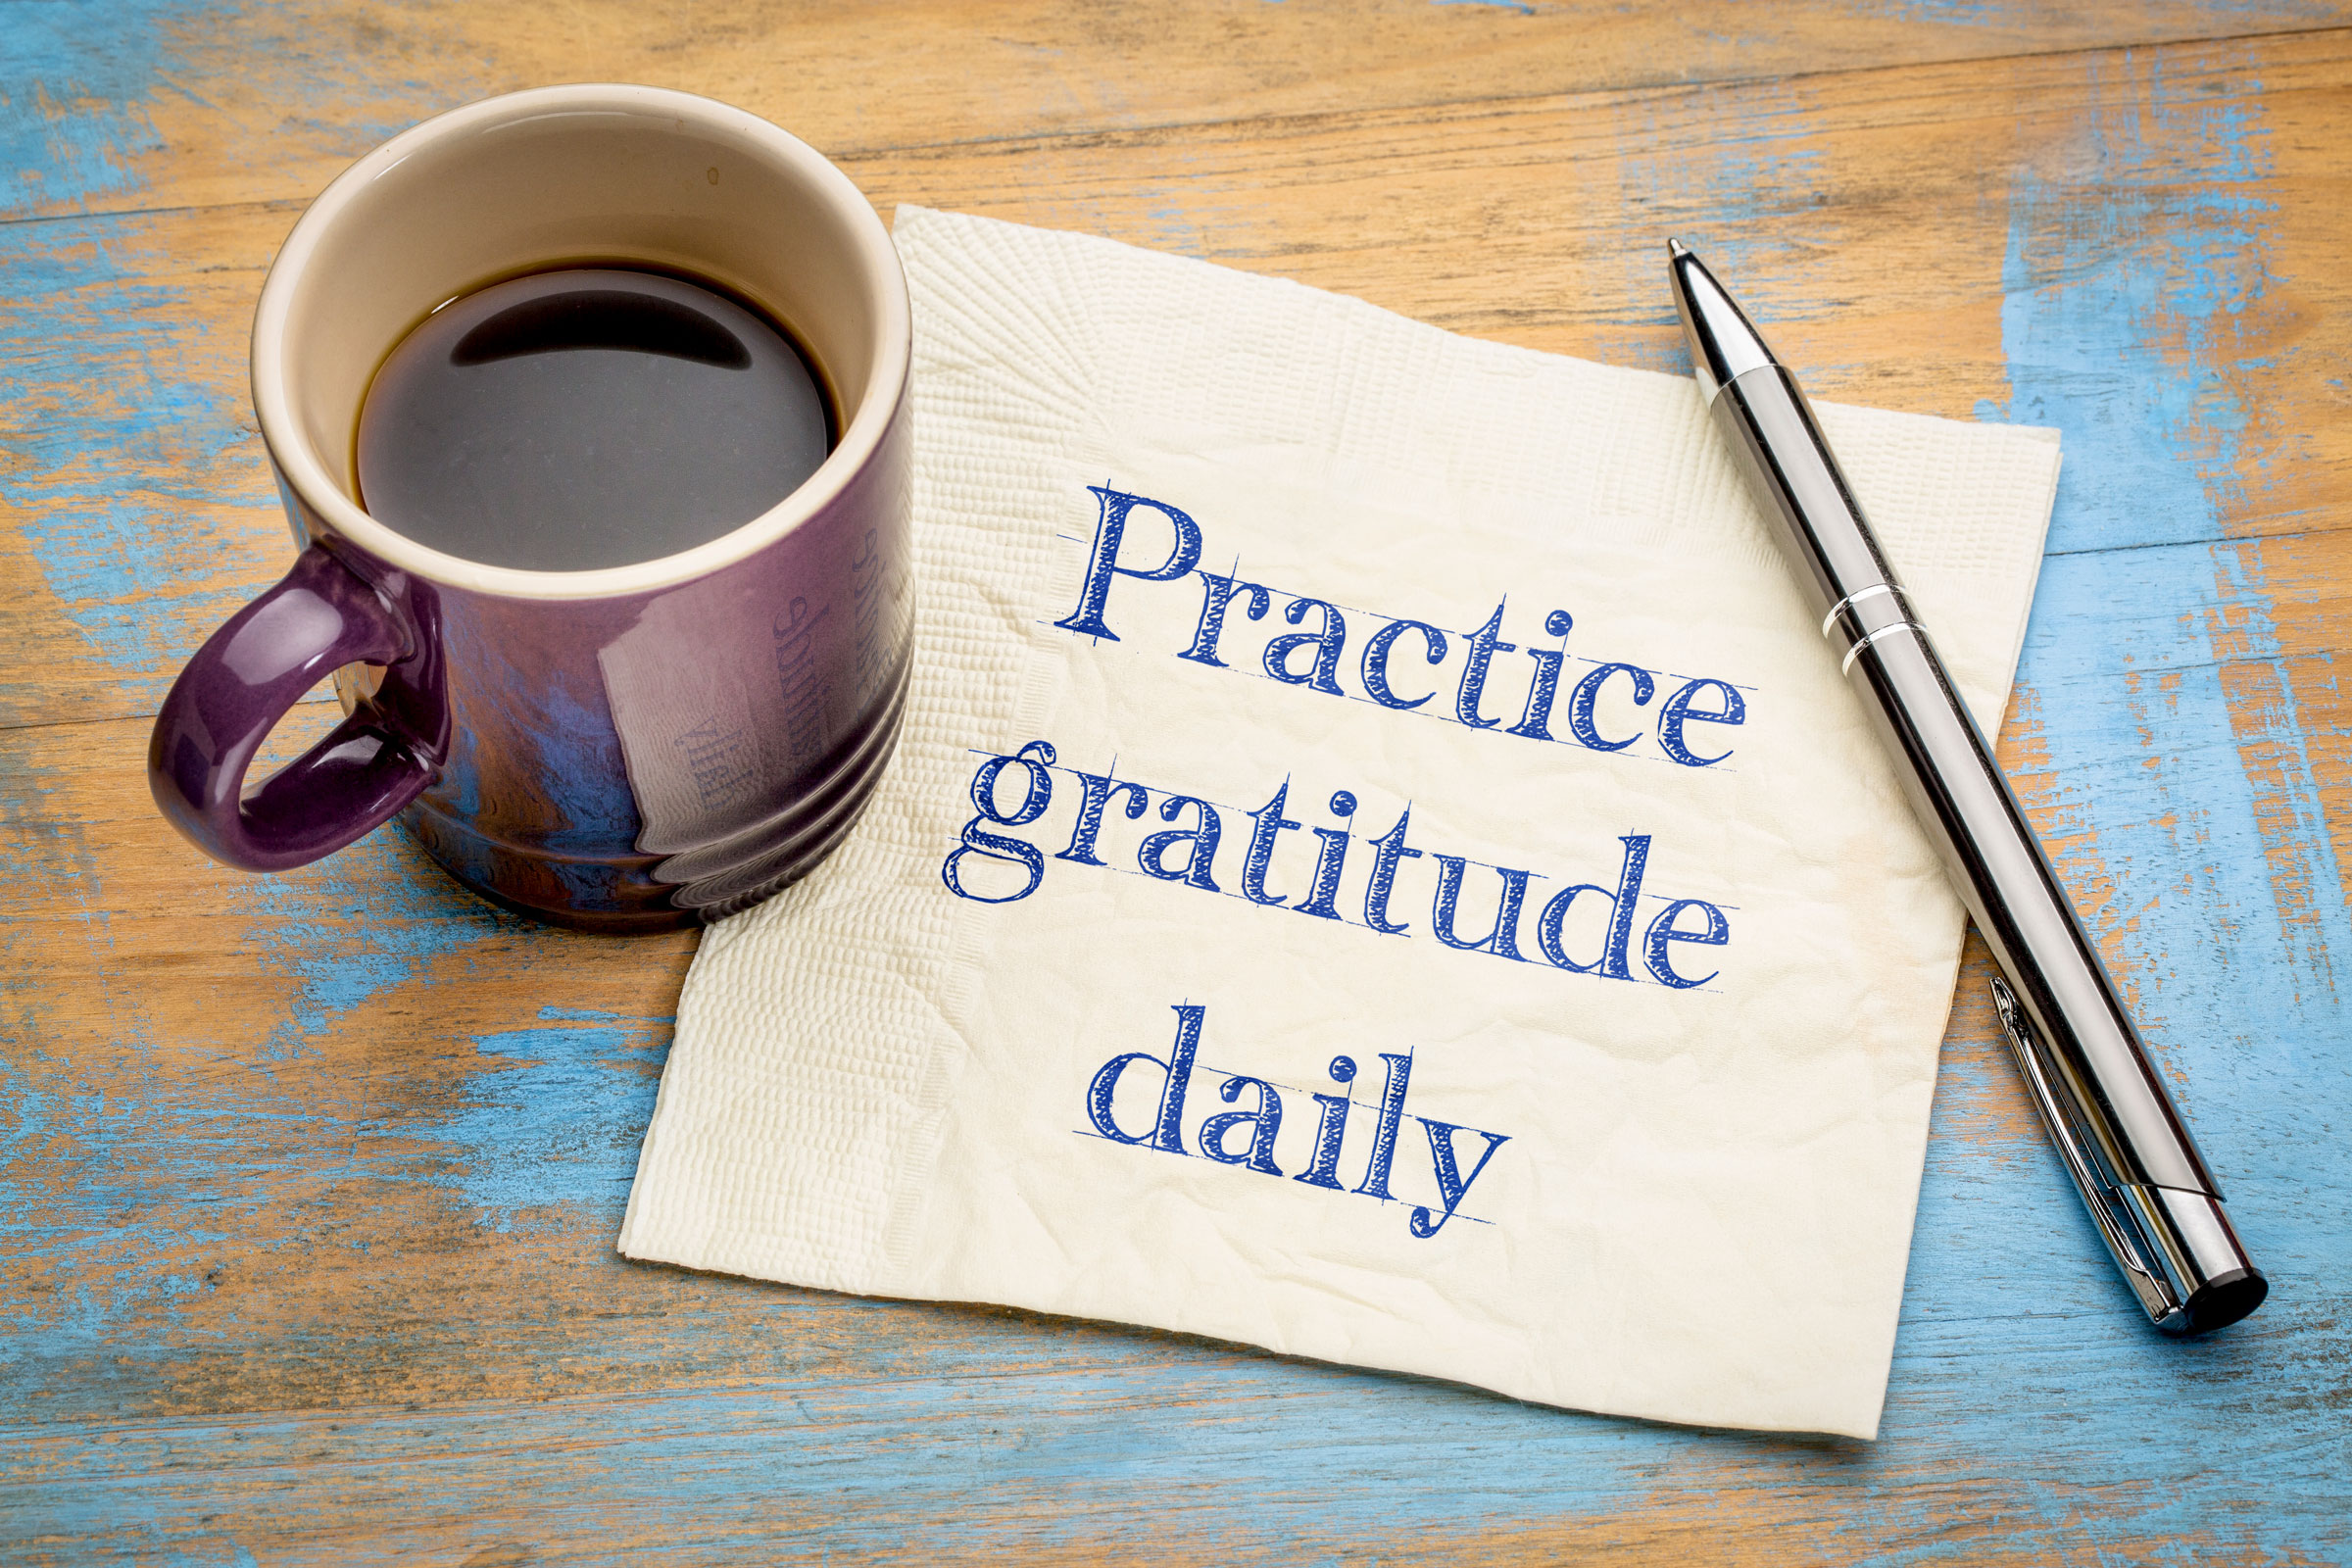 Practice gratitude daily note with coffee